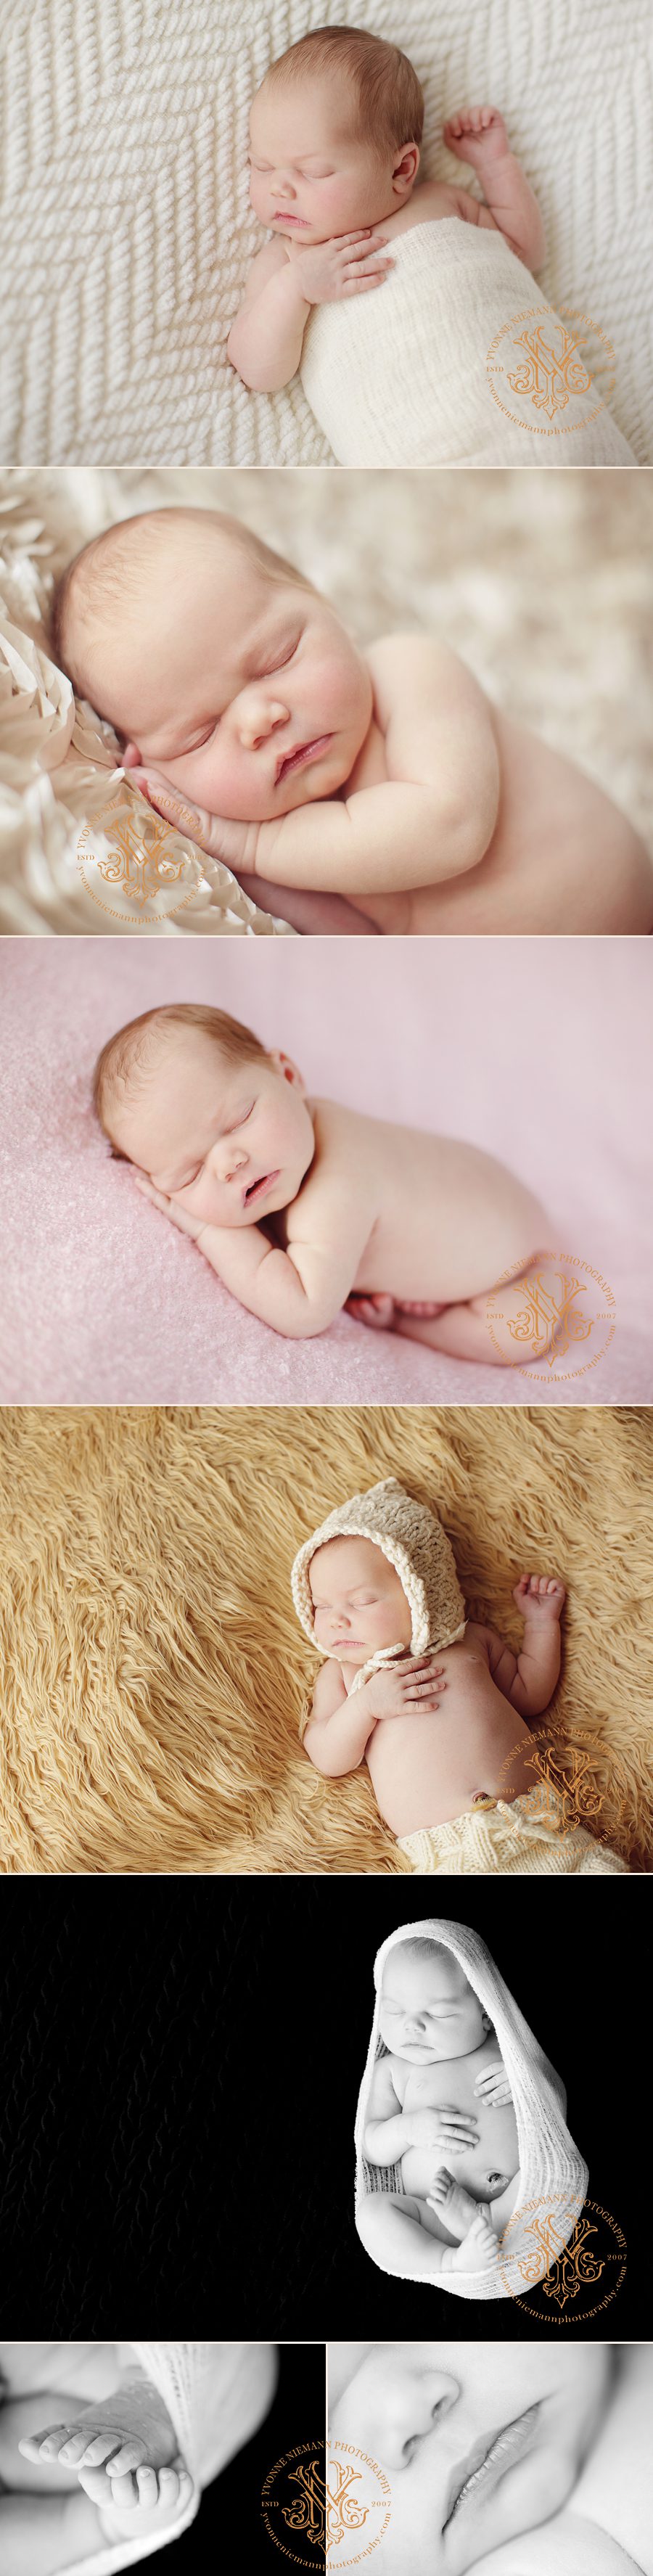 Portraits of a newborn girl at her home in St. Louis taken by Yvonne Niemann Photography.